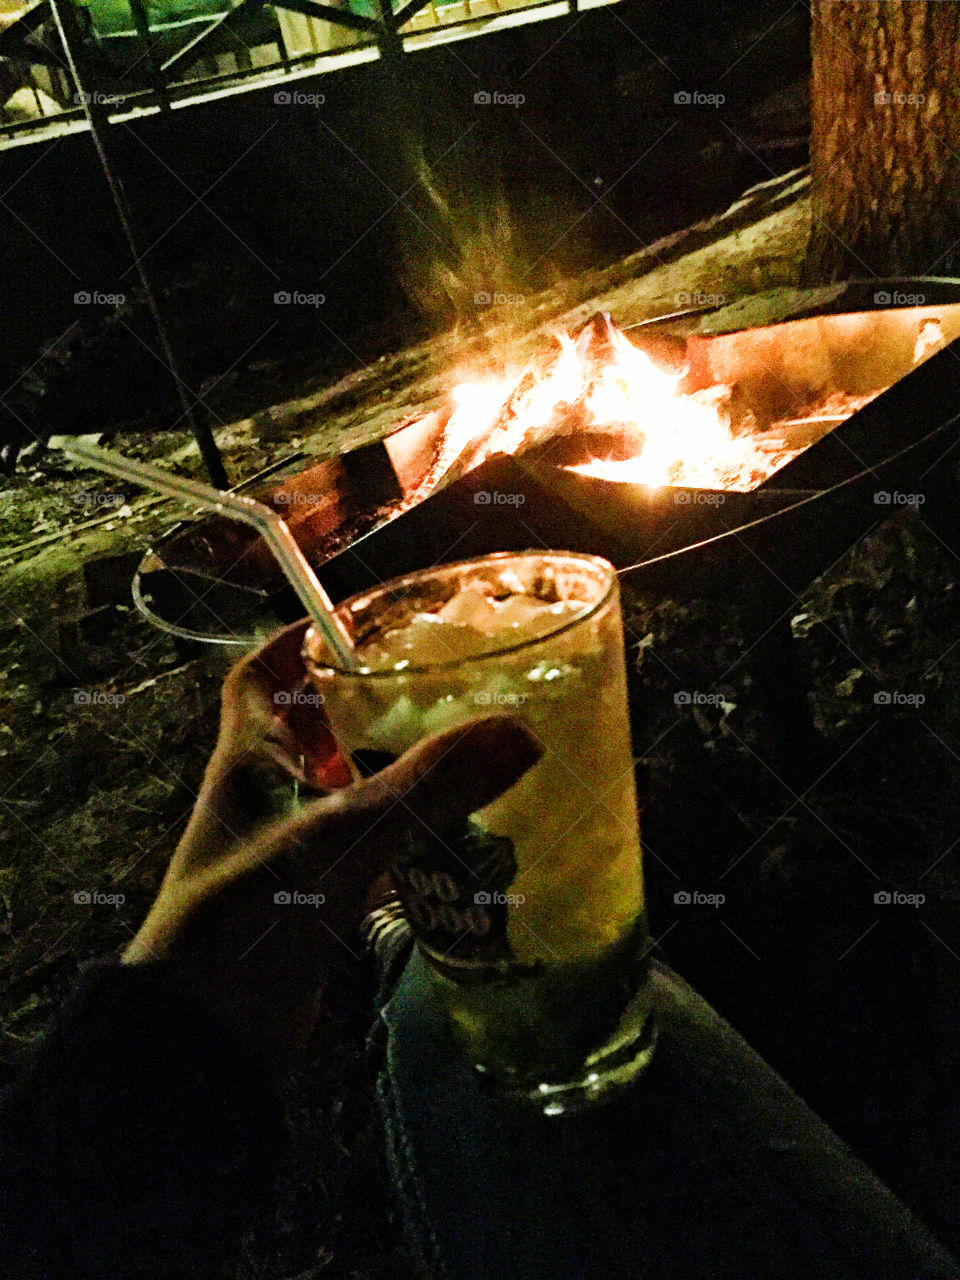 Drink by the fire 